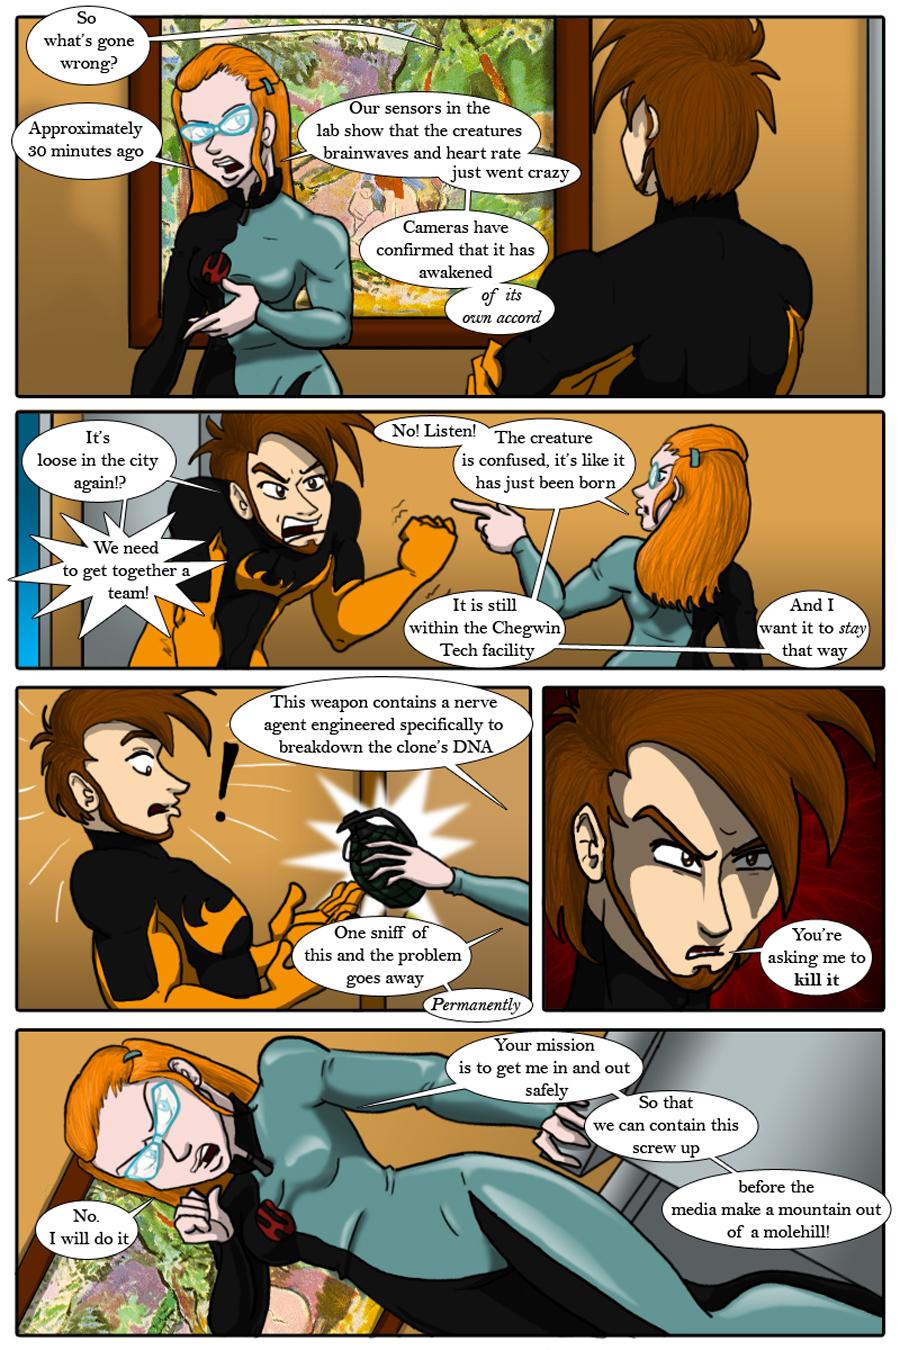 Darkness Within: Page 6 - Tempest_Lavalle